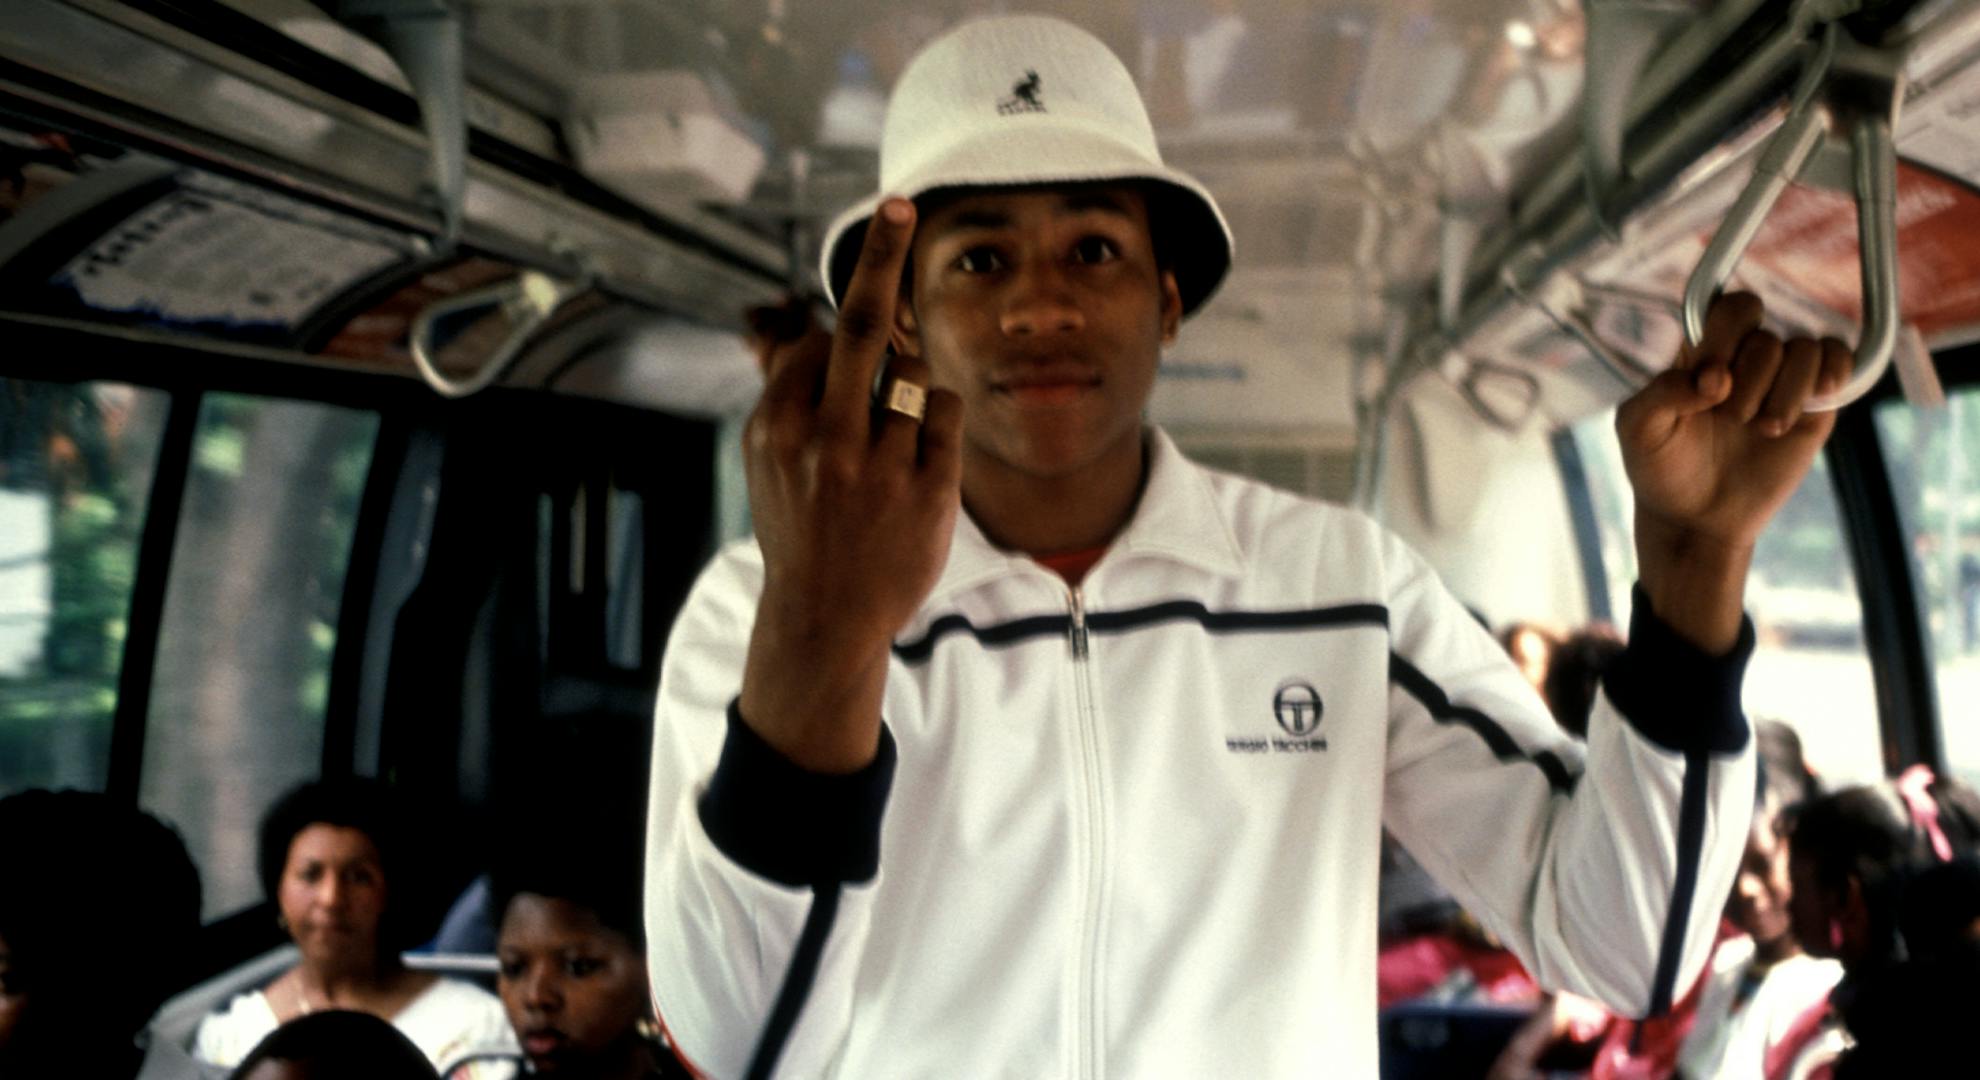 LL COOL J riding the bus in Queen's New York USA 1985.